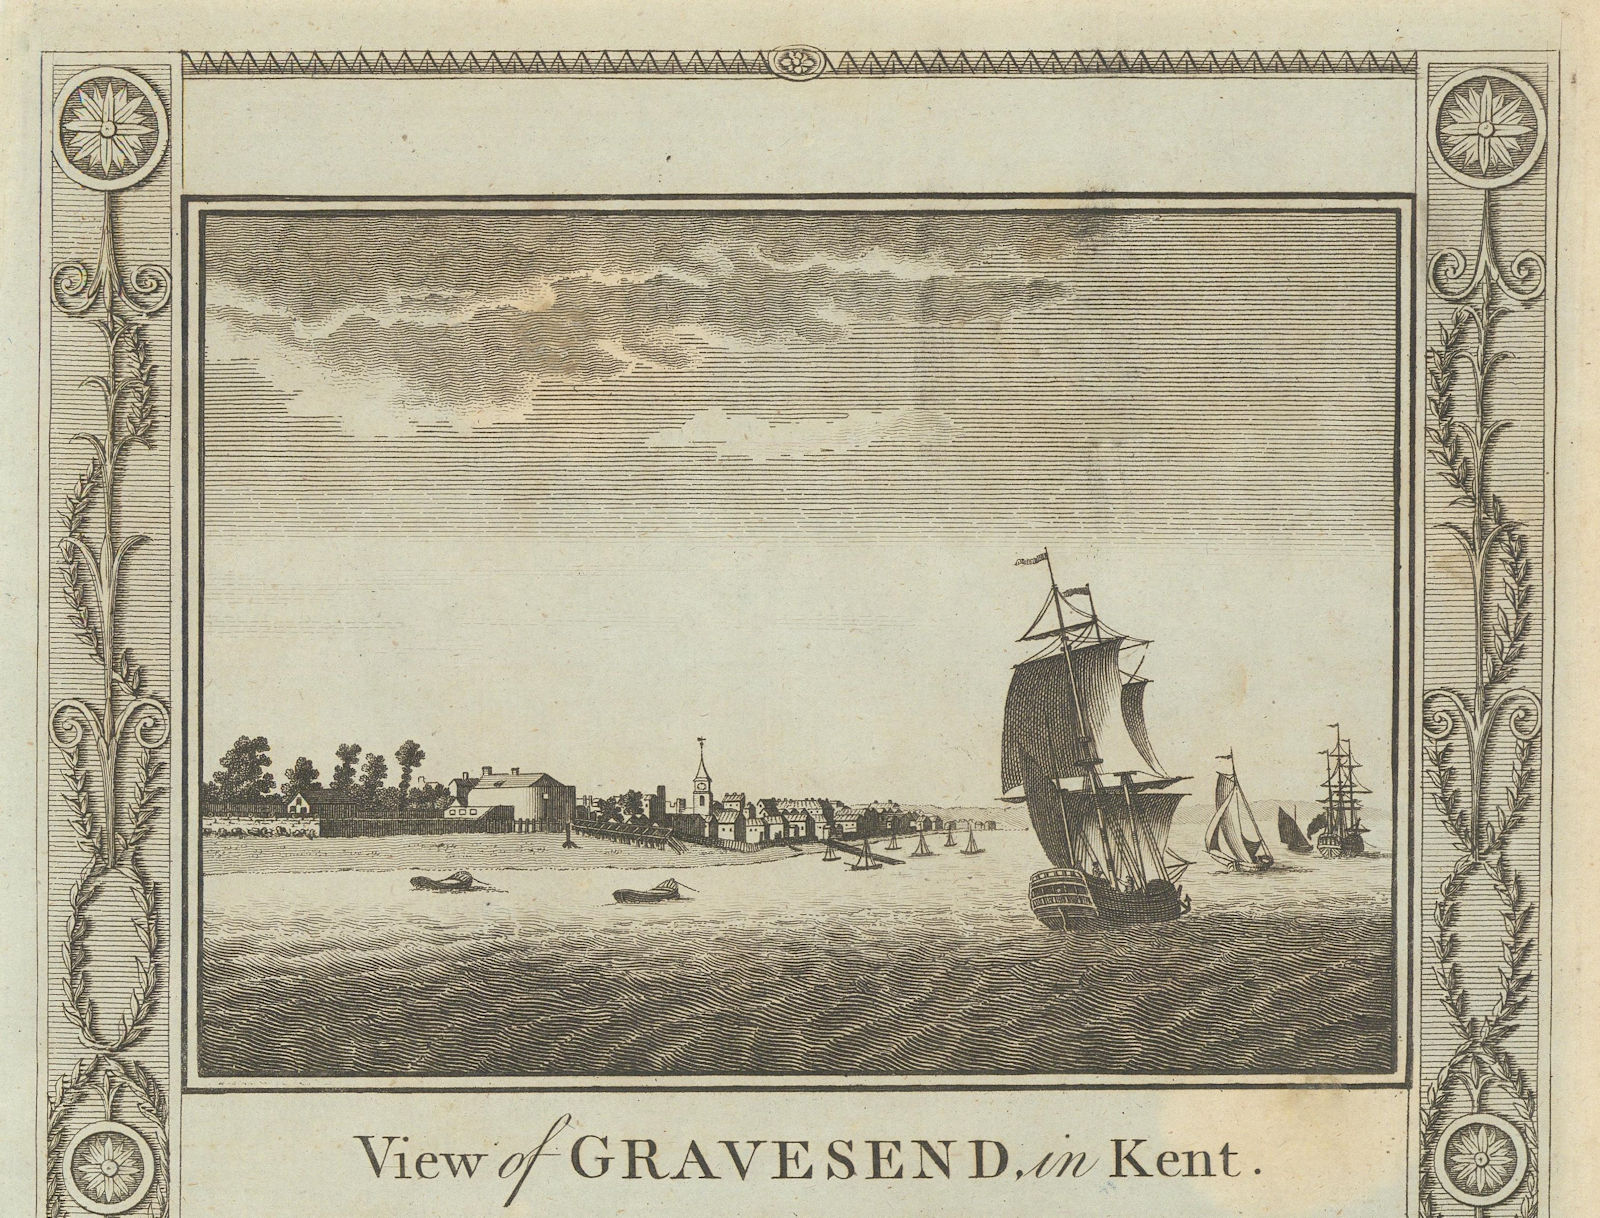 Associate Product View of Gravesend in Kent. St George's church. Sailing ships. THORNTON 1784